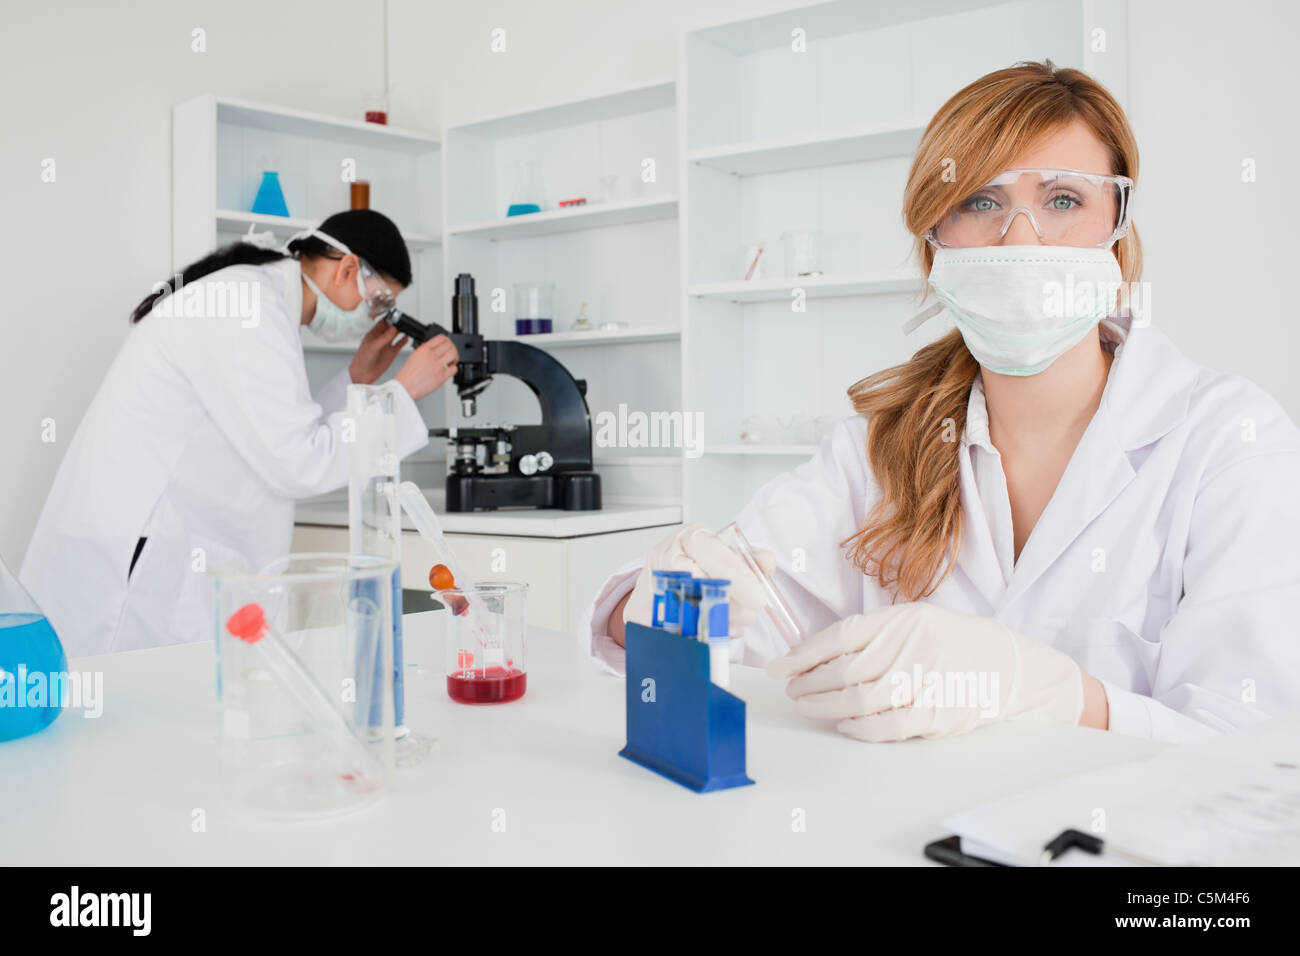 Two female scientists conducting an experiment Stock Photo